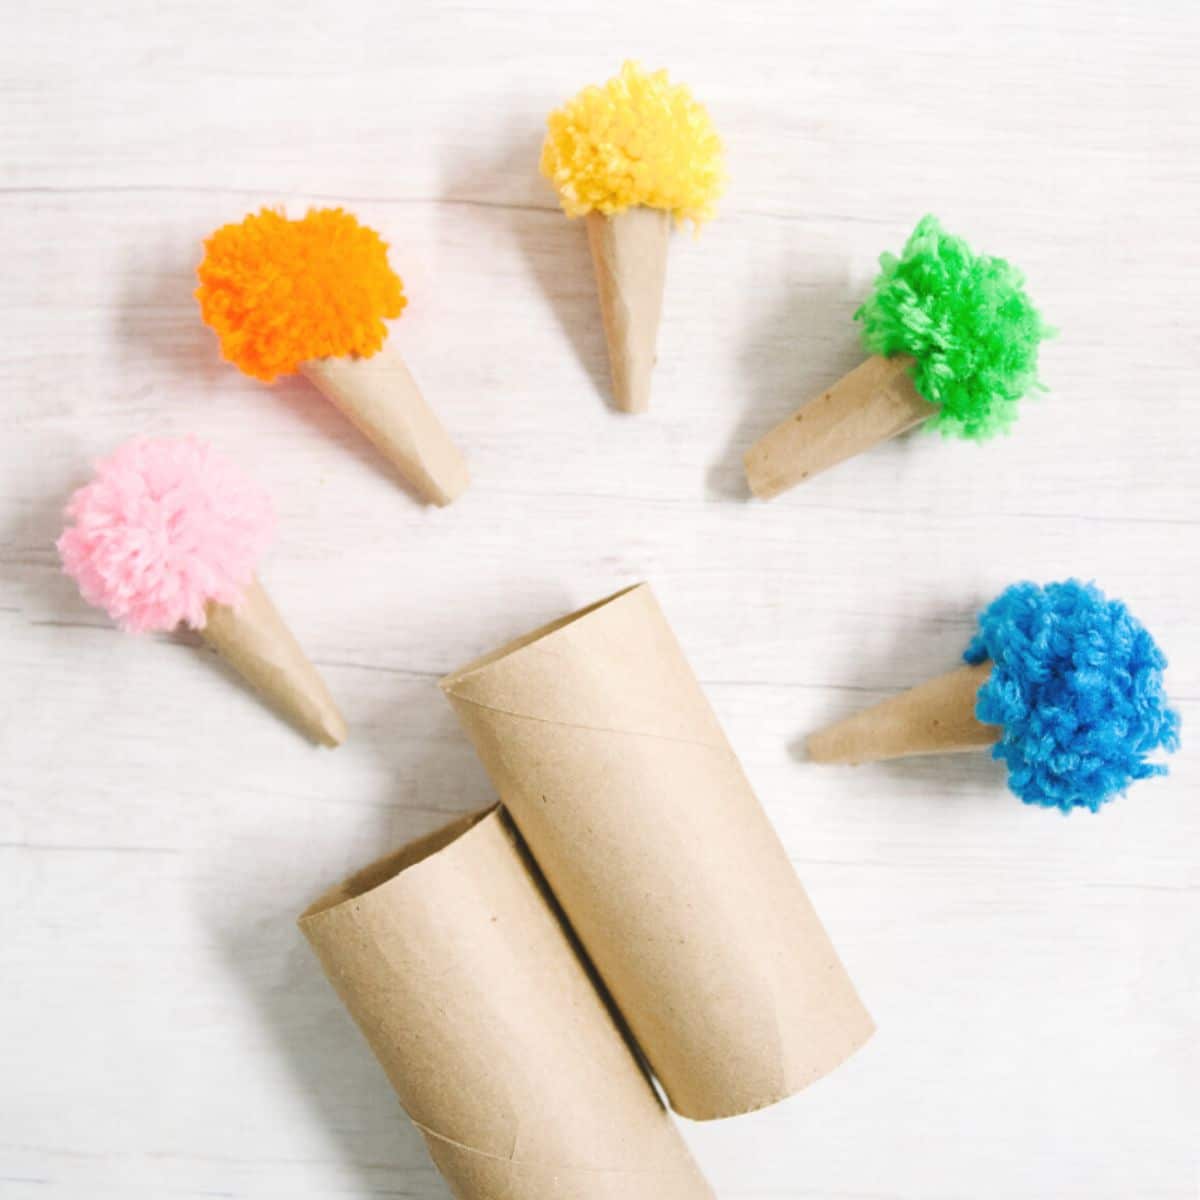 Cardboard ice cream cones made out of toilet paper tubes, with rainbow colored yarn pom poms as ice cream scoops.